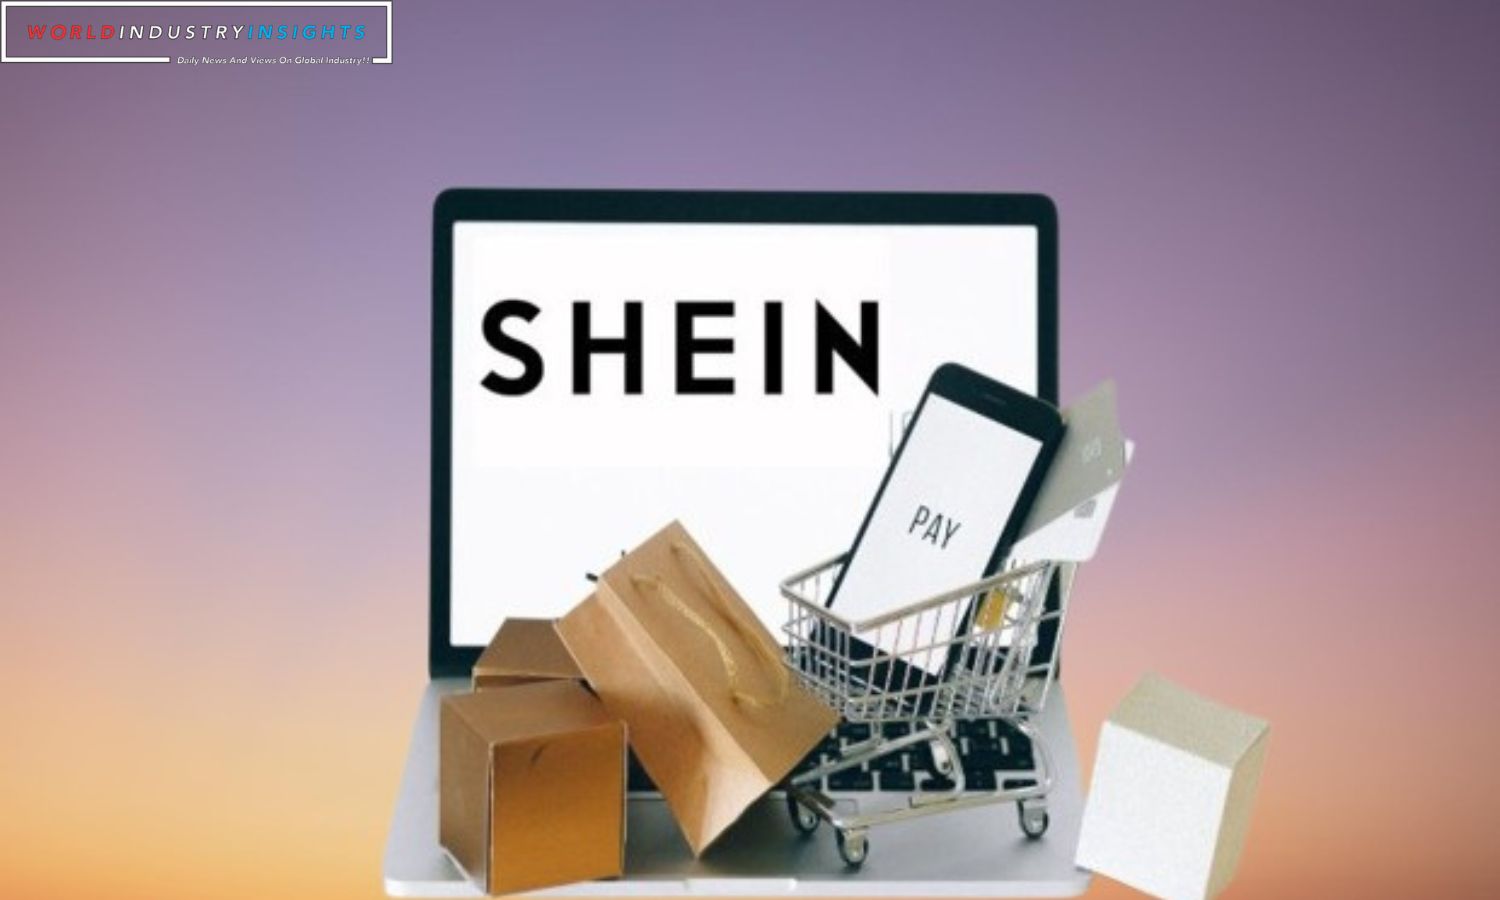 Shein Acquires Missguided